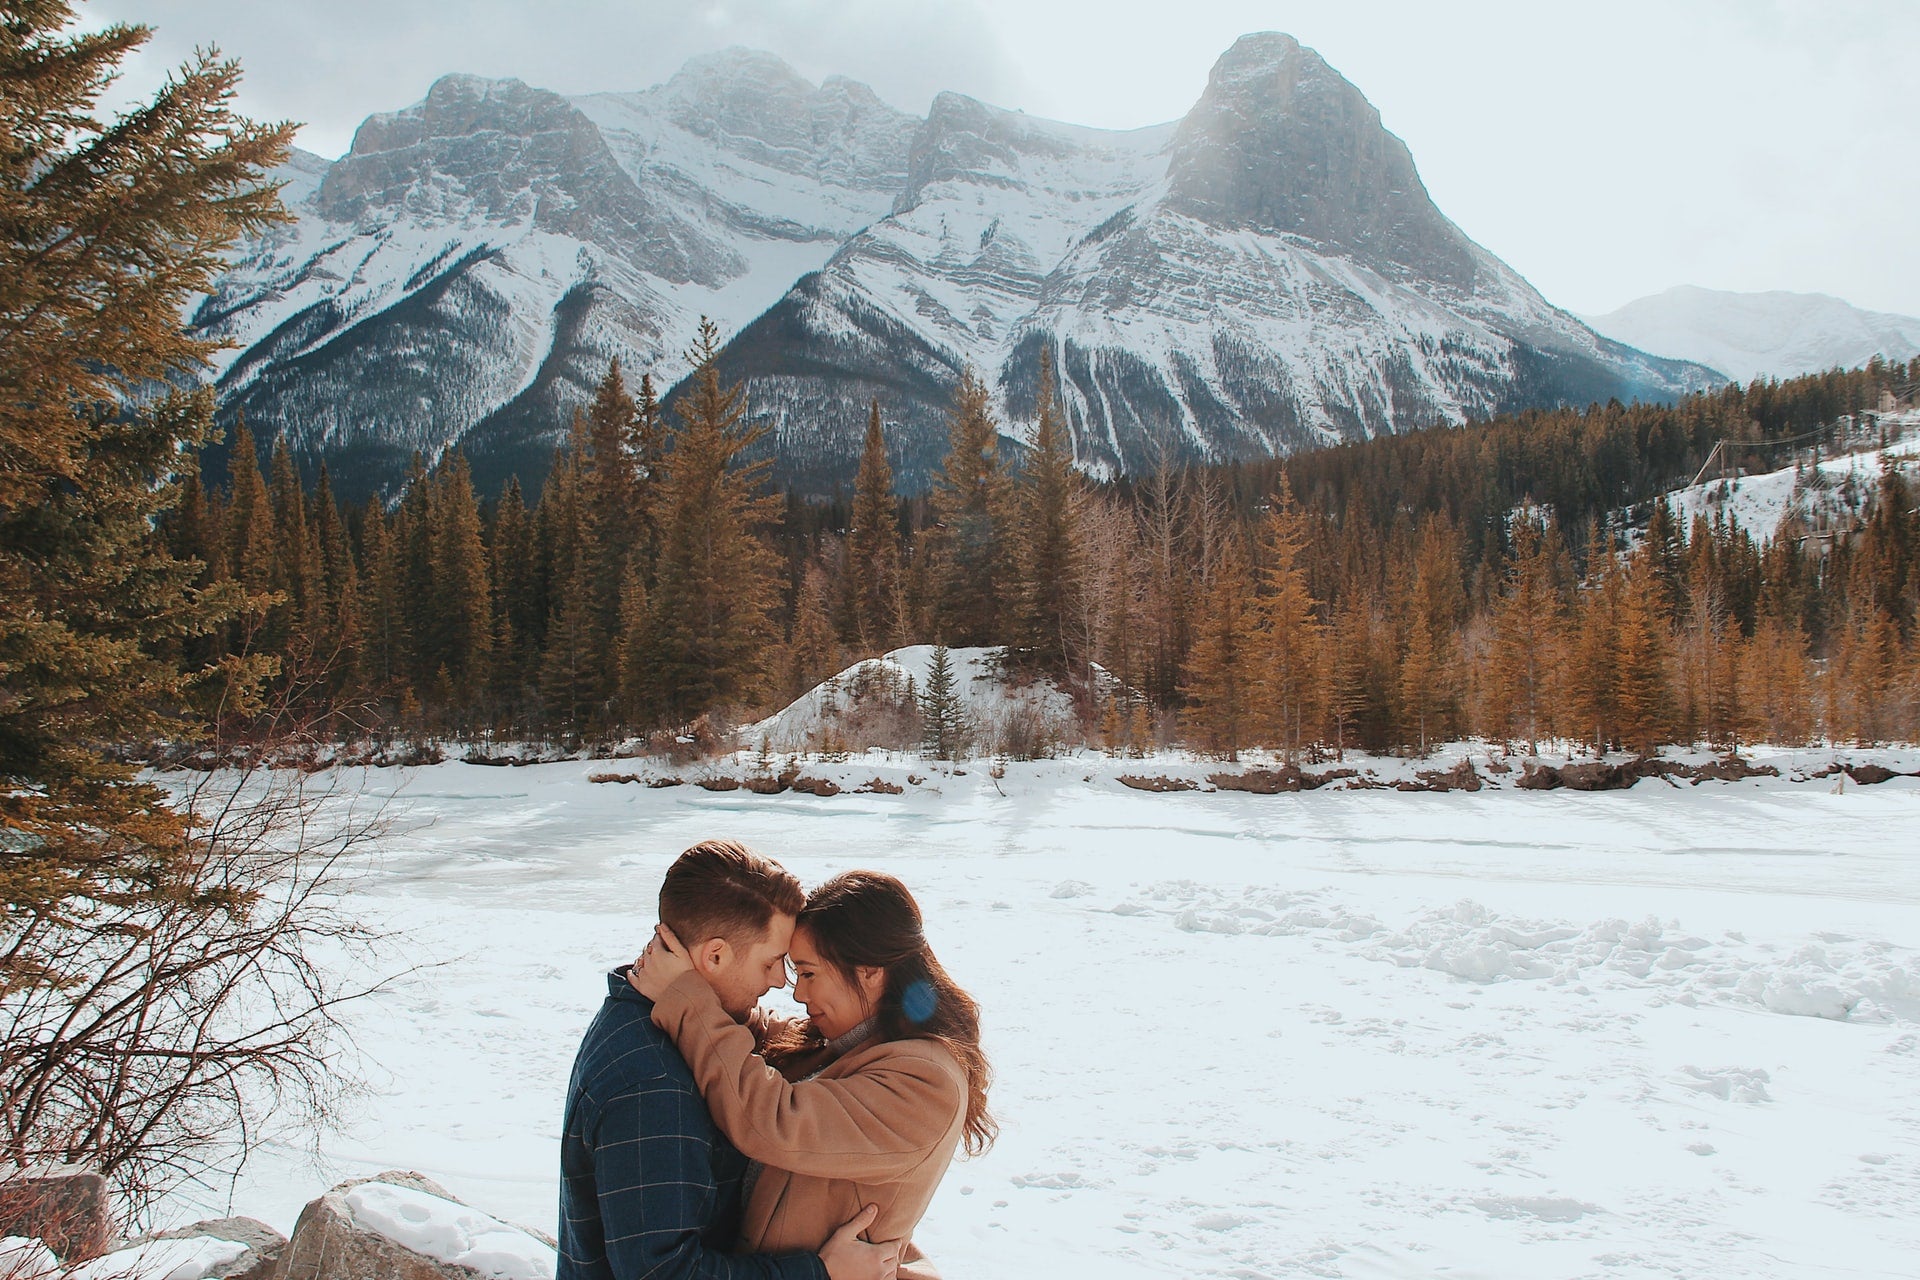 couple embracing each other with a beautiful snowy mountain in the background